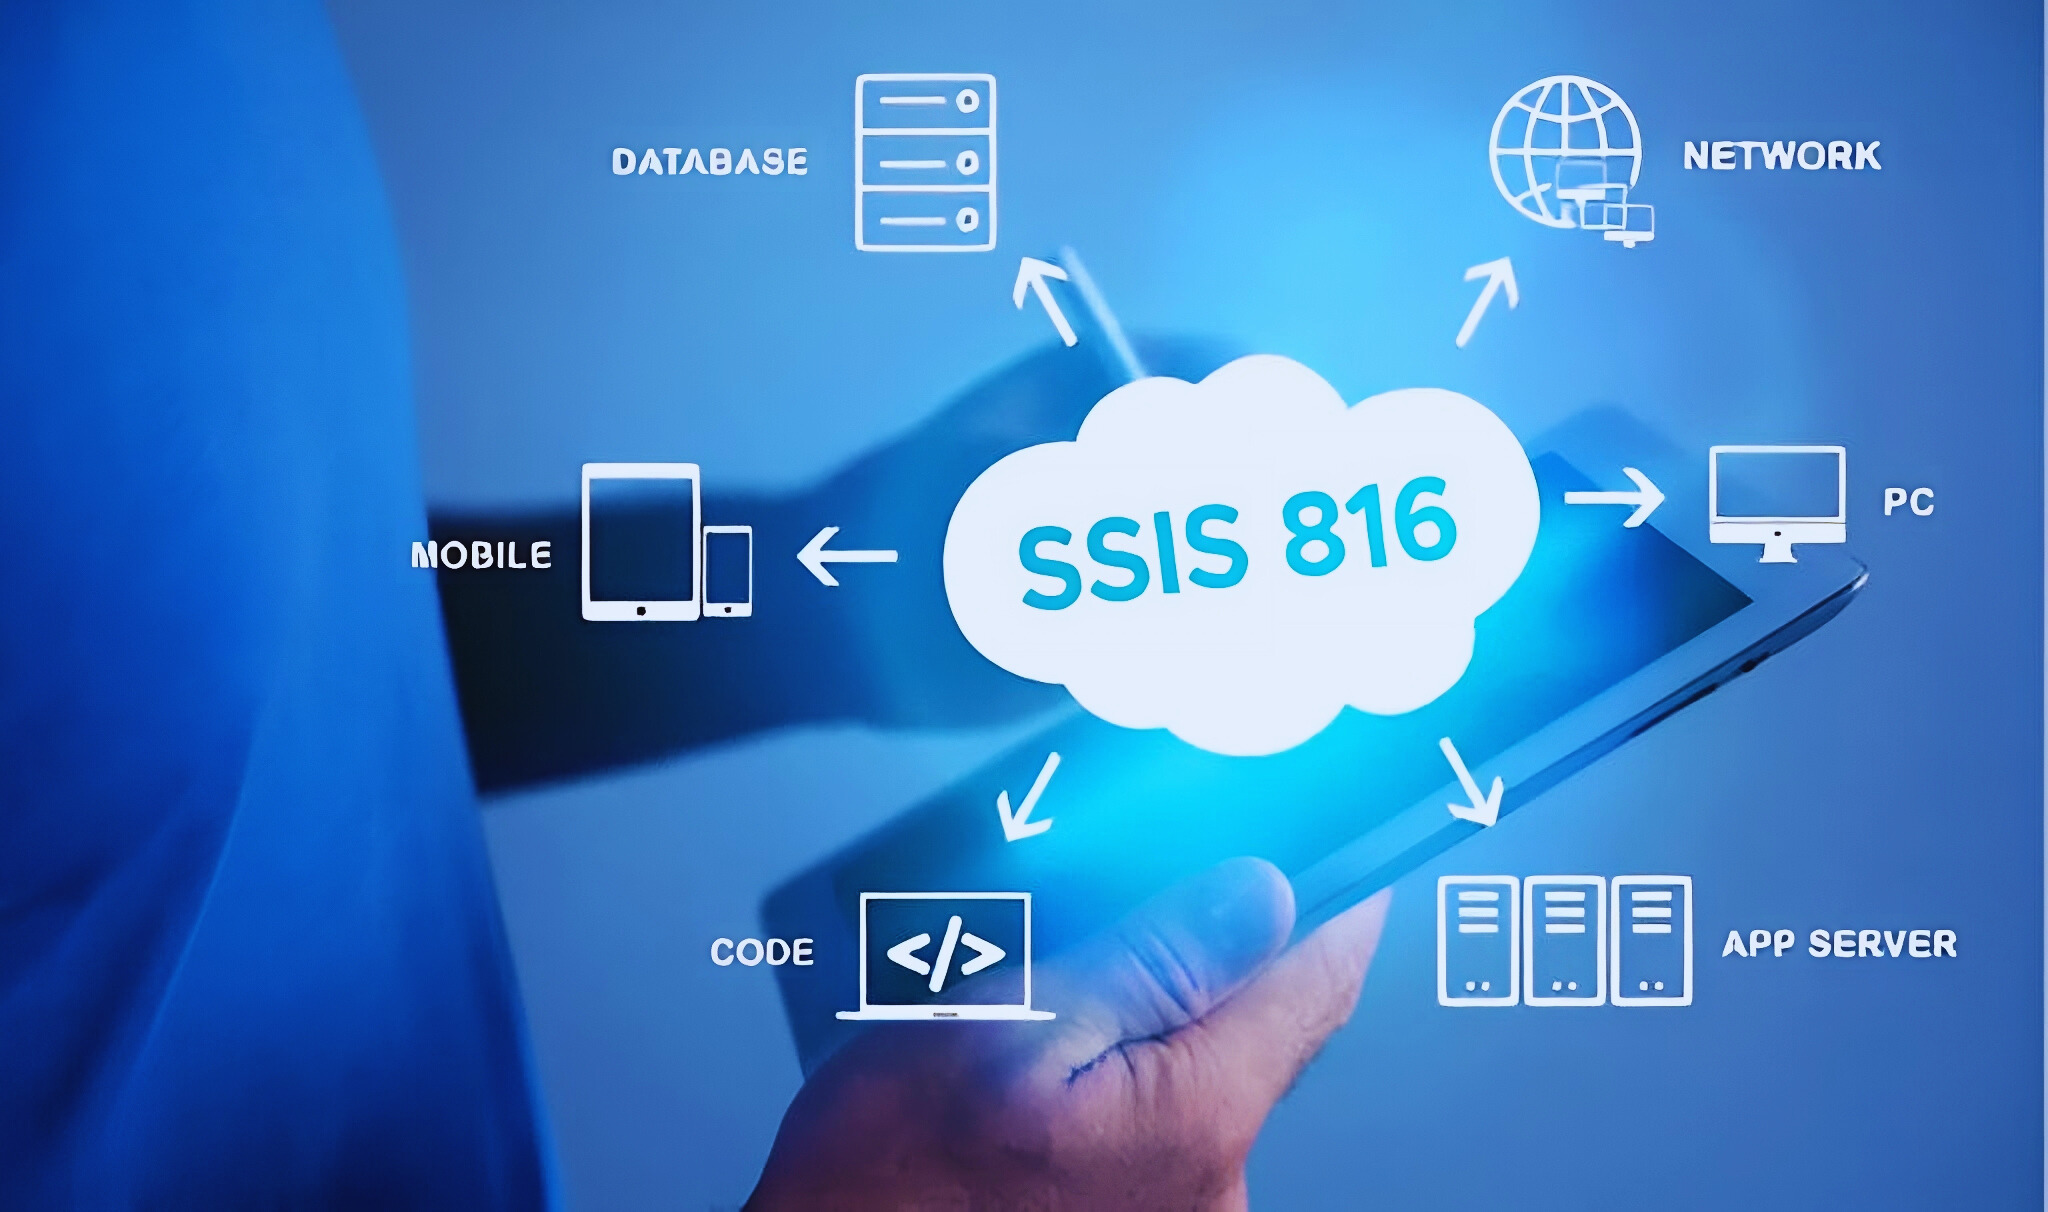 SSIS 816 Elevating Data Management Efficiency